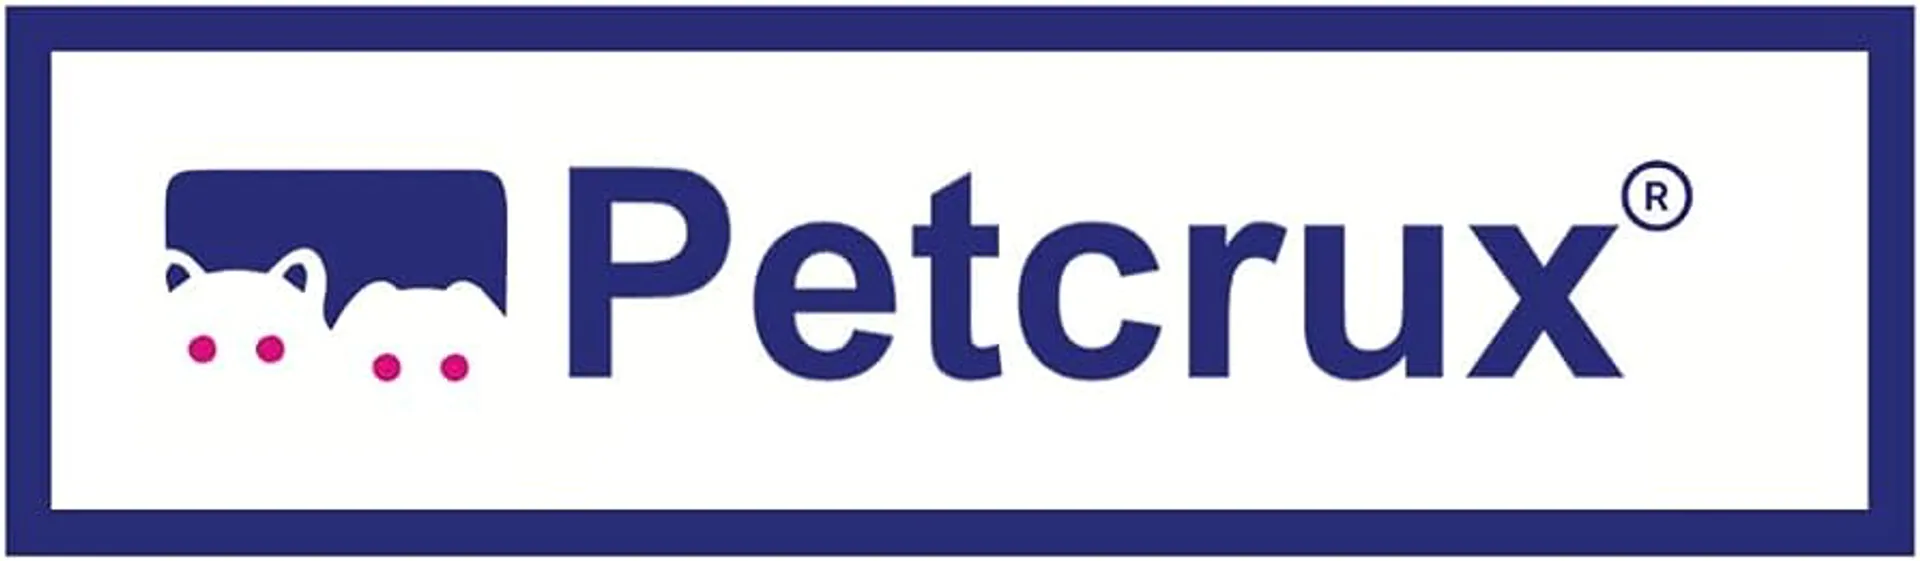 PETCRUX logo. Current weekly ad